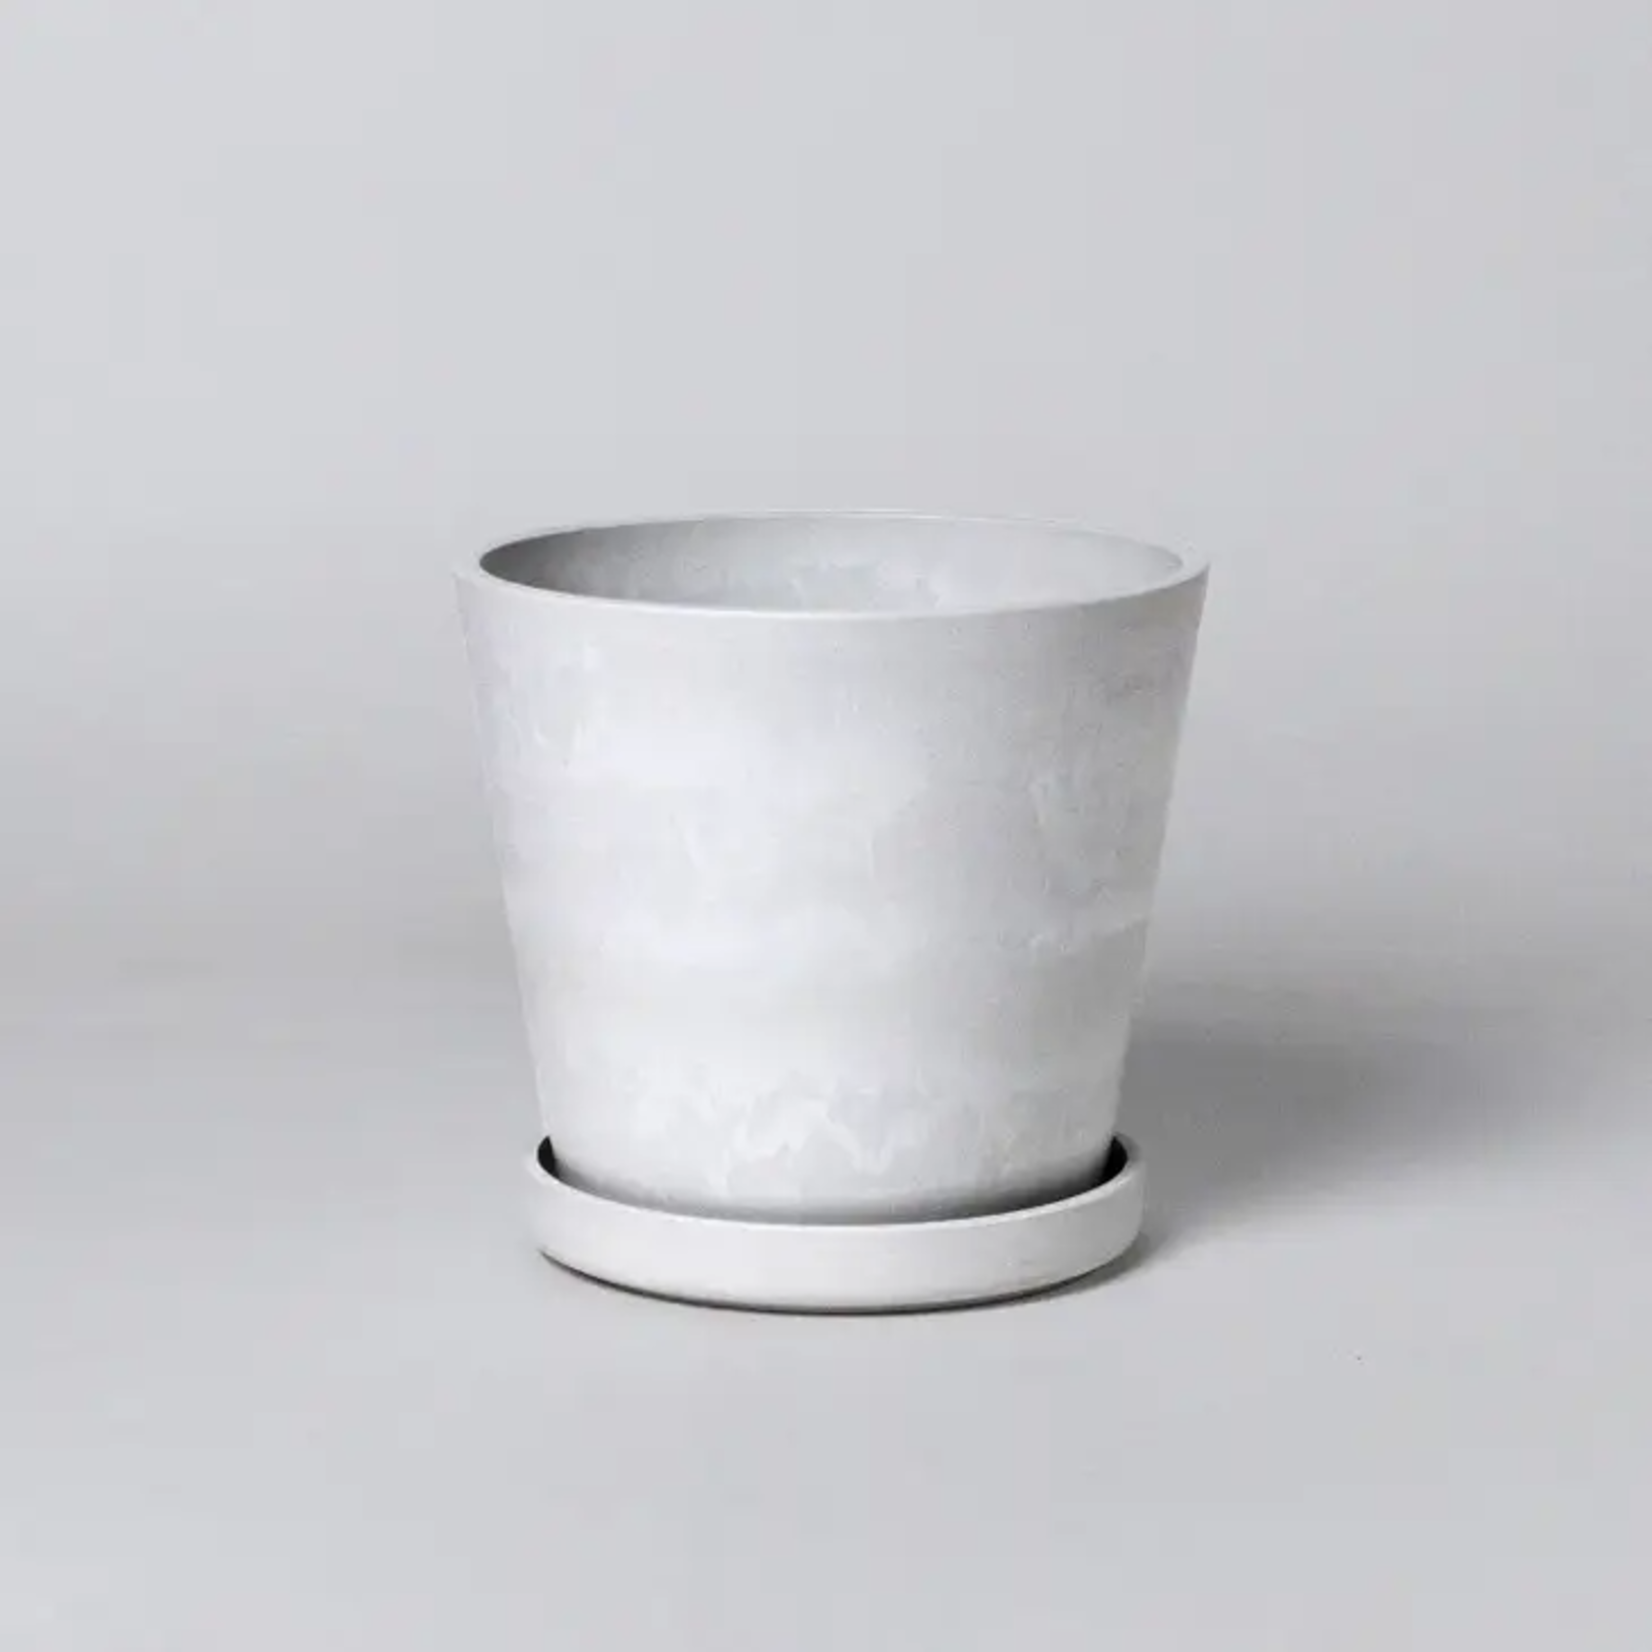 Kanso Designs 7"White Stone Tapered Pot w/Saucer